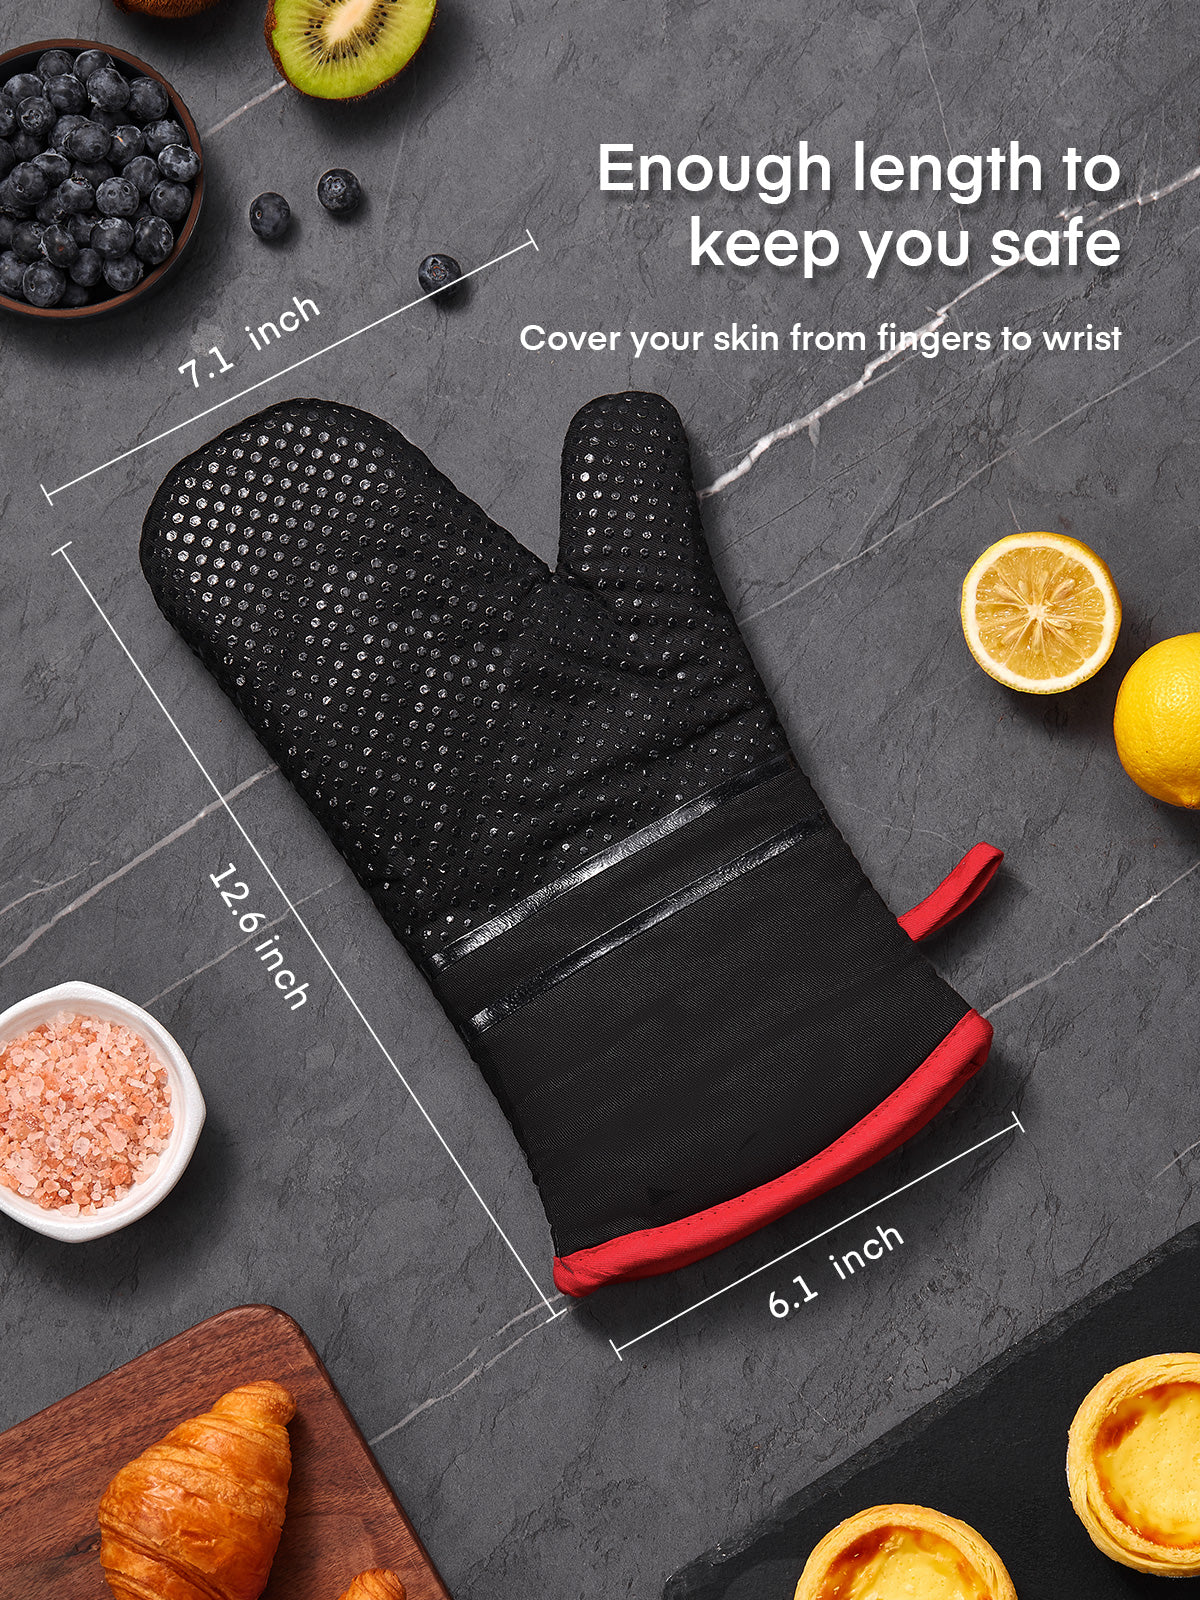 Oven Mitts, Heat Resistant Kitchen Oven Gloves 572°F, Non-Slip Silicone Surface, Extra Long Flexible Thick Mitts for Kitchen , Cooking , Baking , BBQ , Black